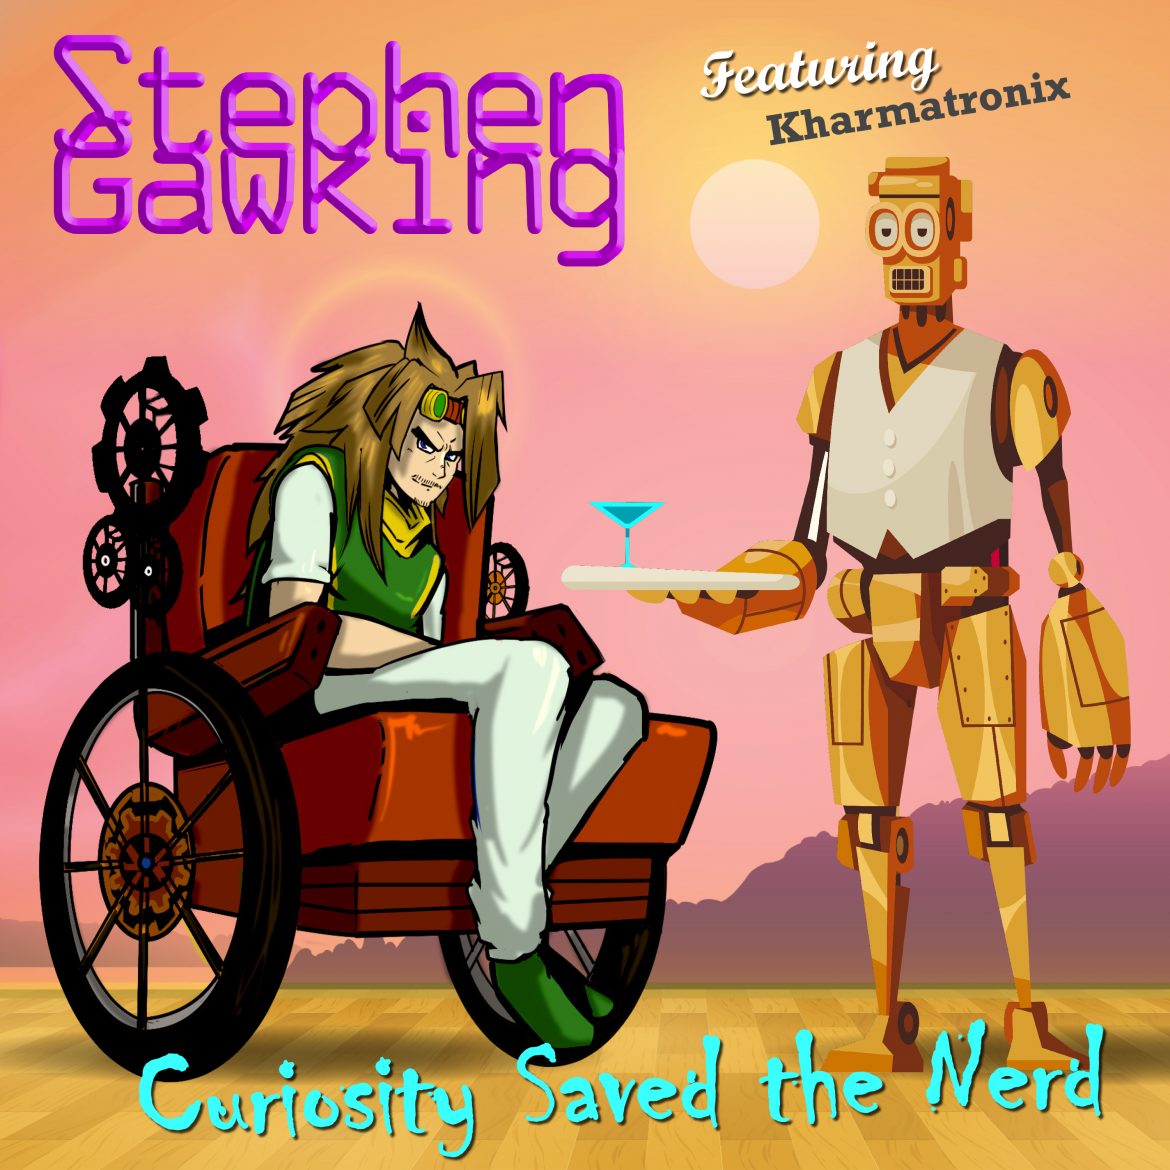 Stephen Gawking releases fourth single – the follow up remix CURIOSITY SAVED THE NERD FEAT Kharmatronix – NOW ADDED TO BAFANA FM